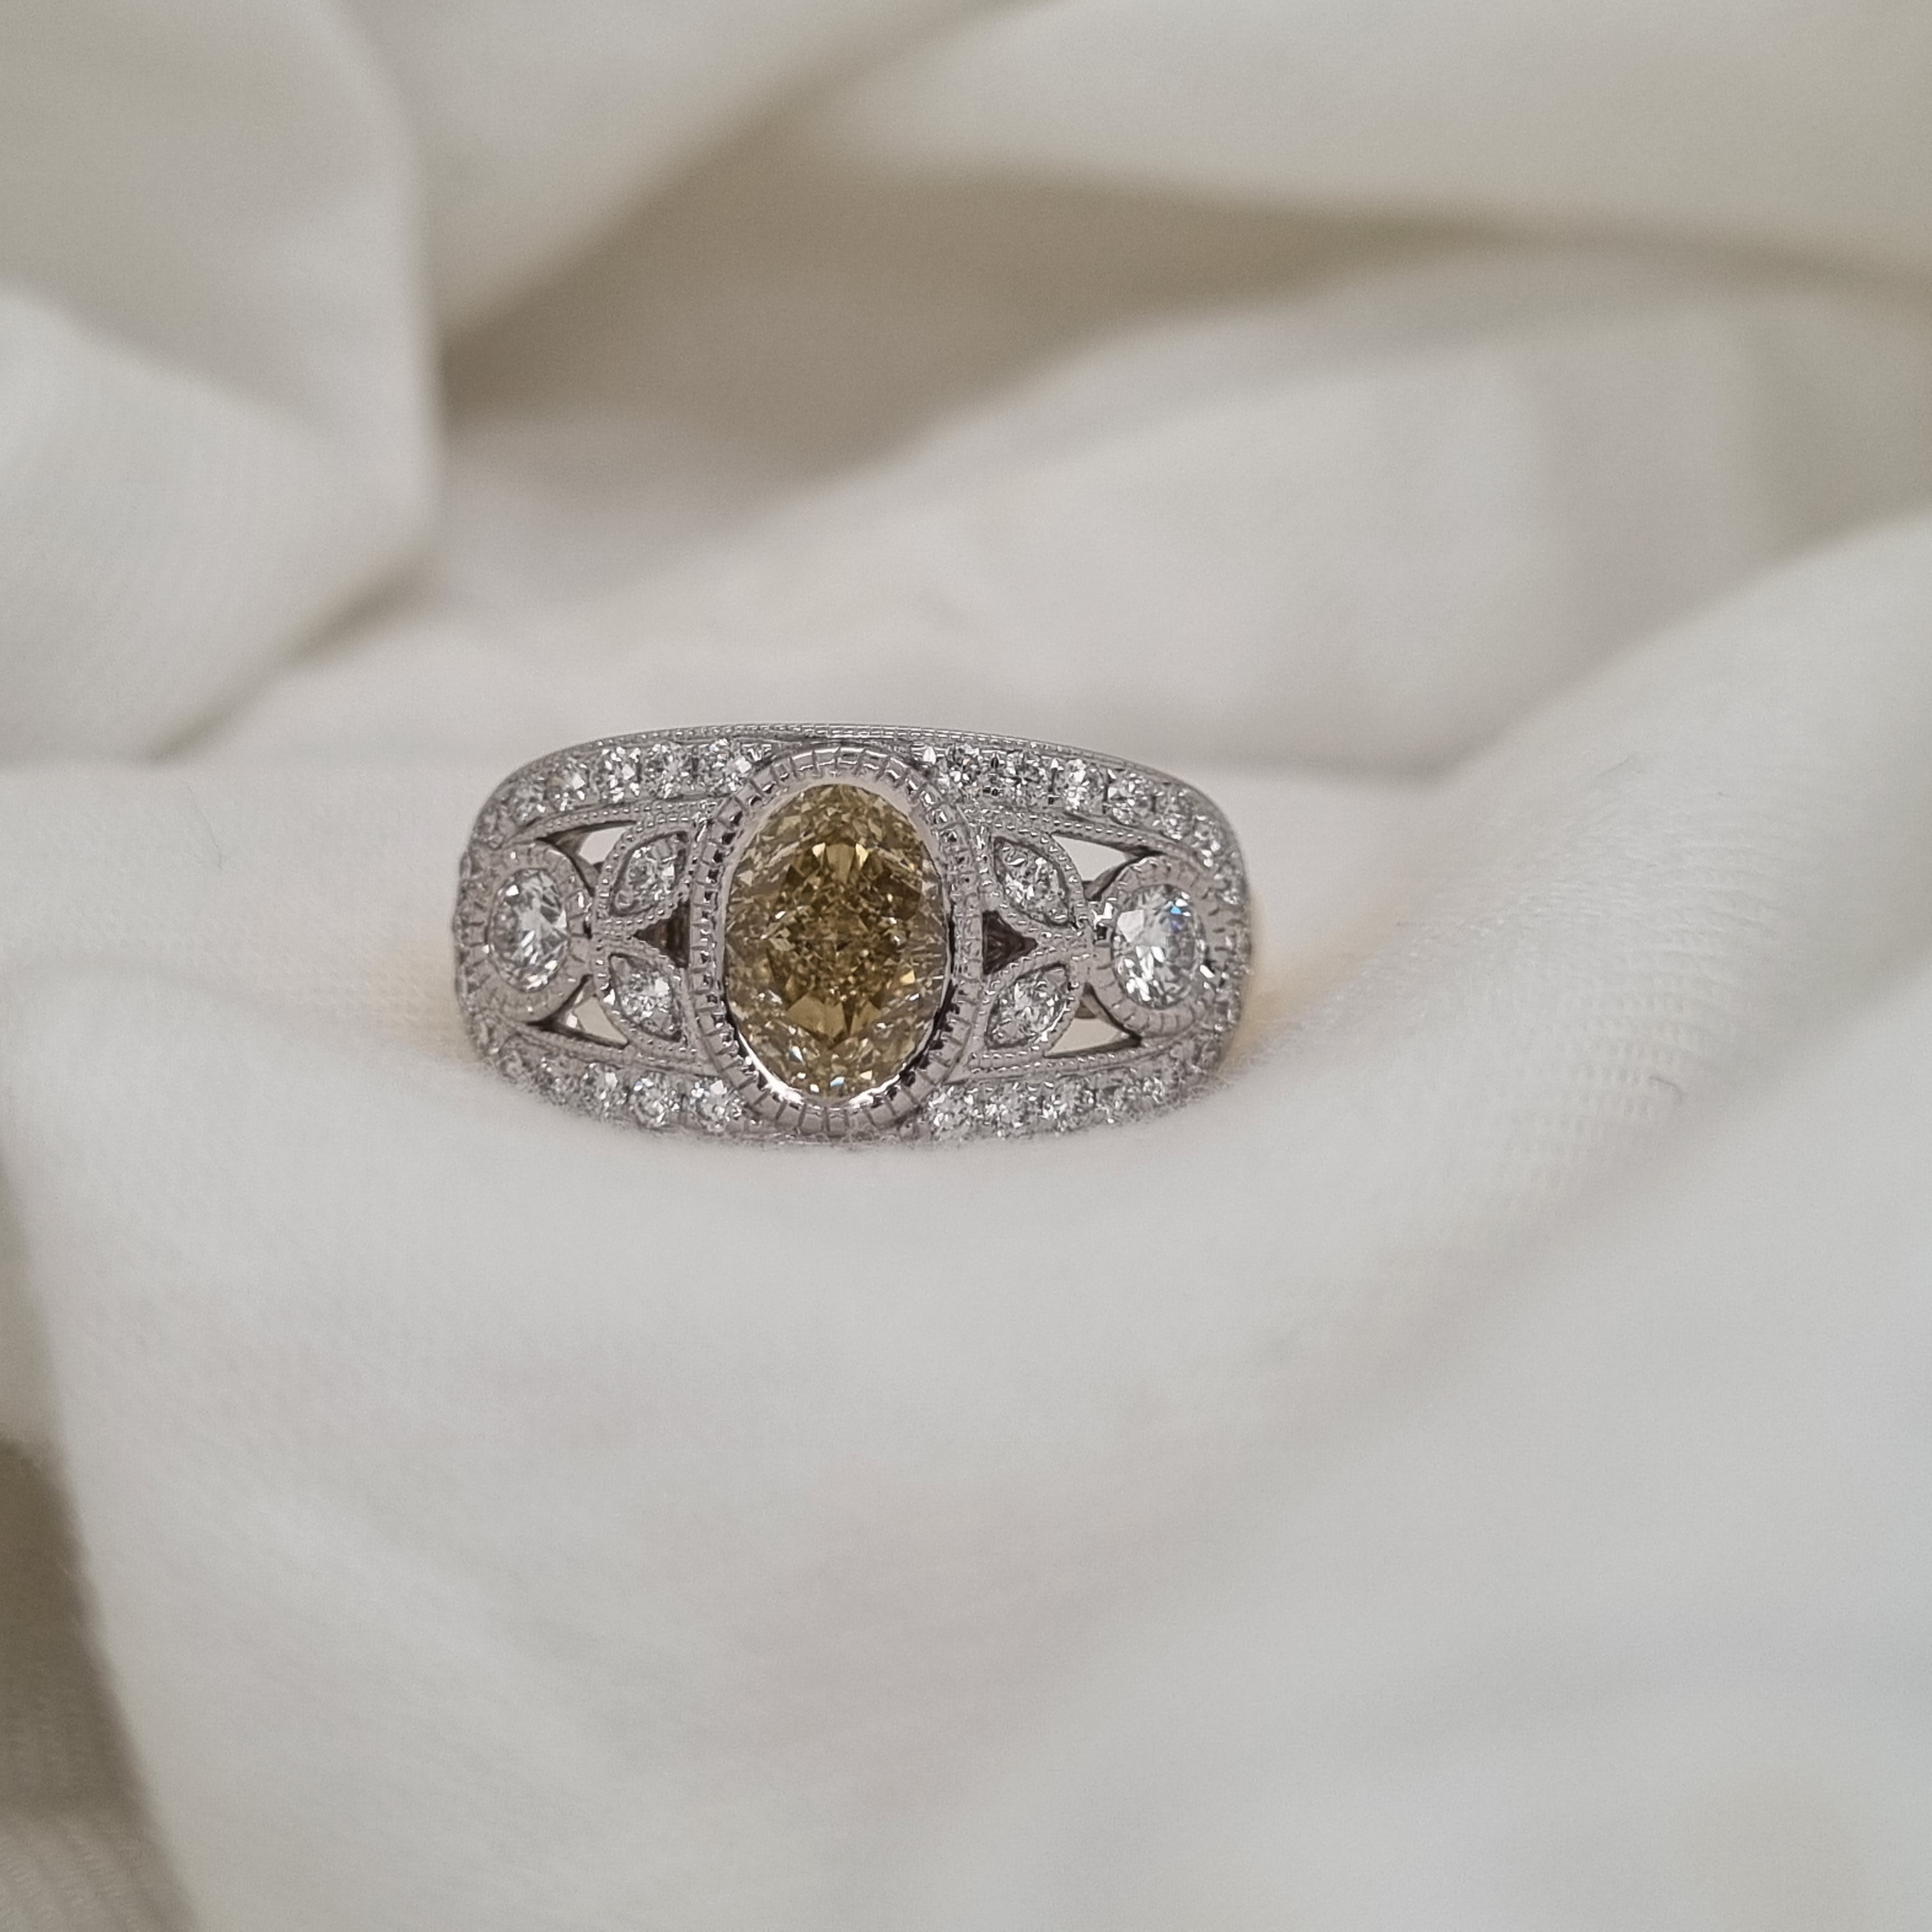 18ct Gold Natural Yellow Oval Diamond Ring, 1.15 carat centre.